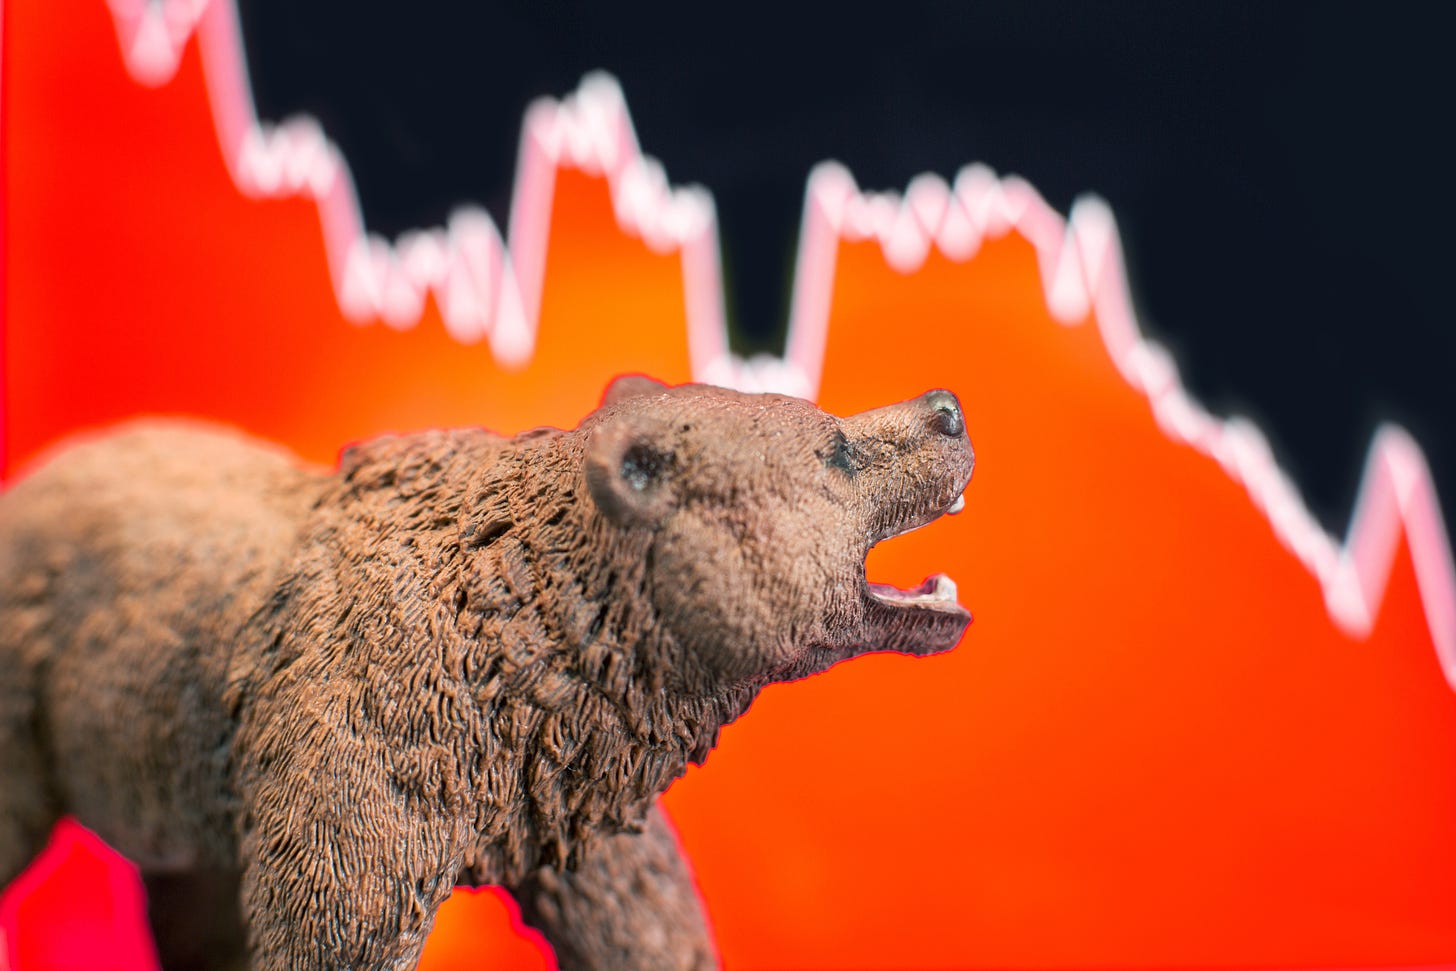 Bear Market Investing: 3 Things to Do to Make Money | The Motley Fool